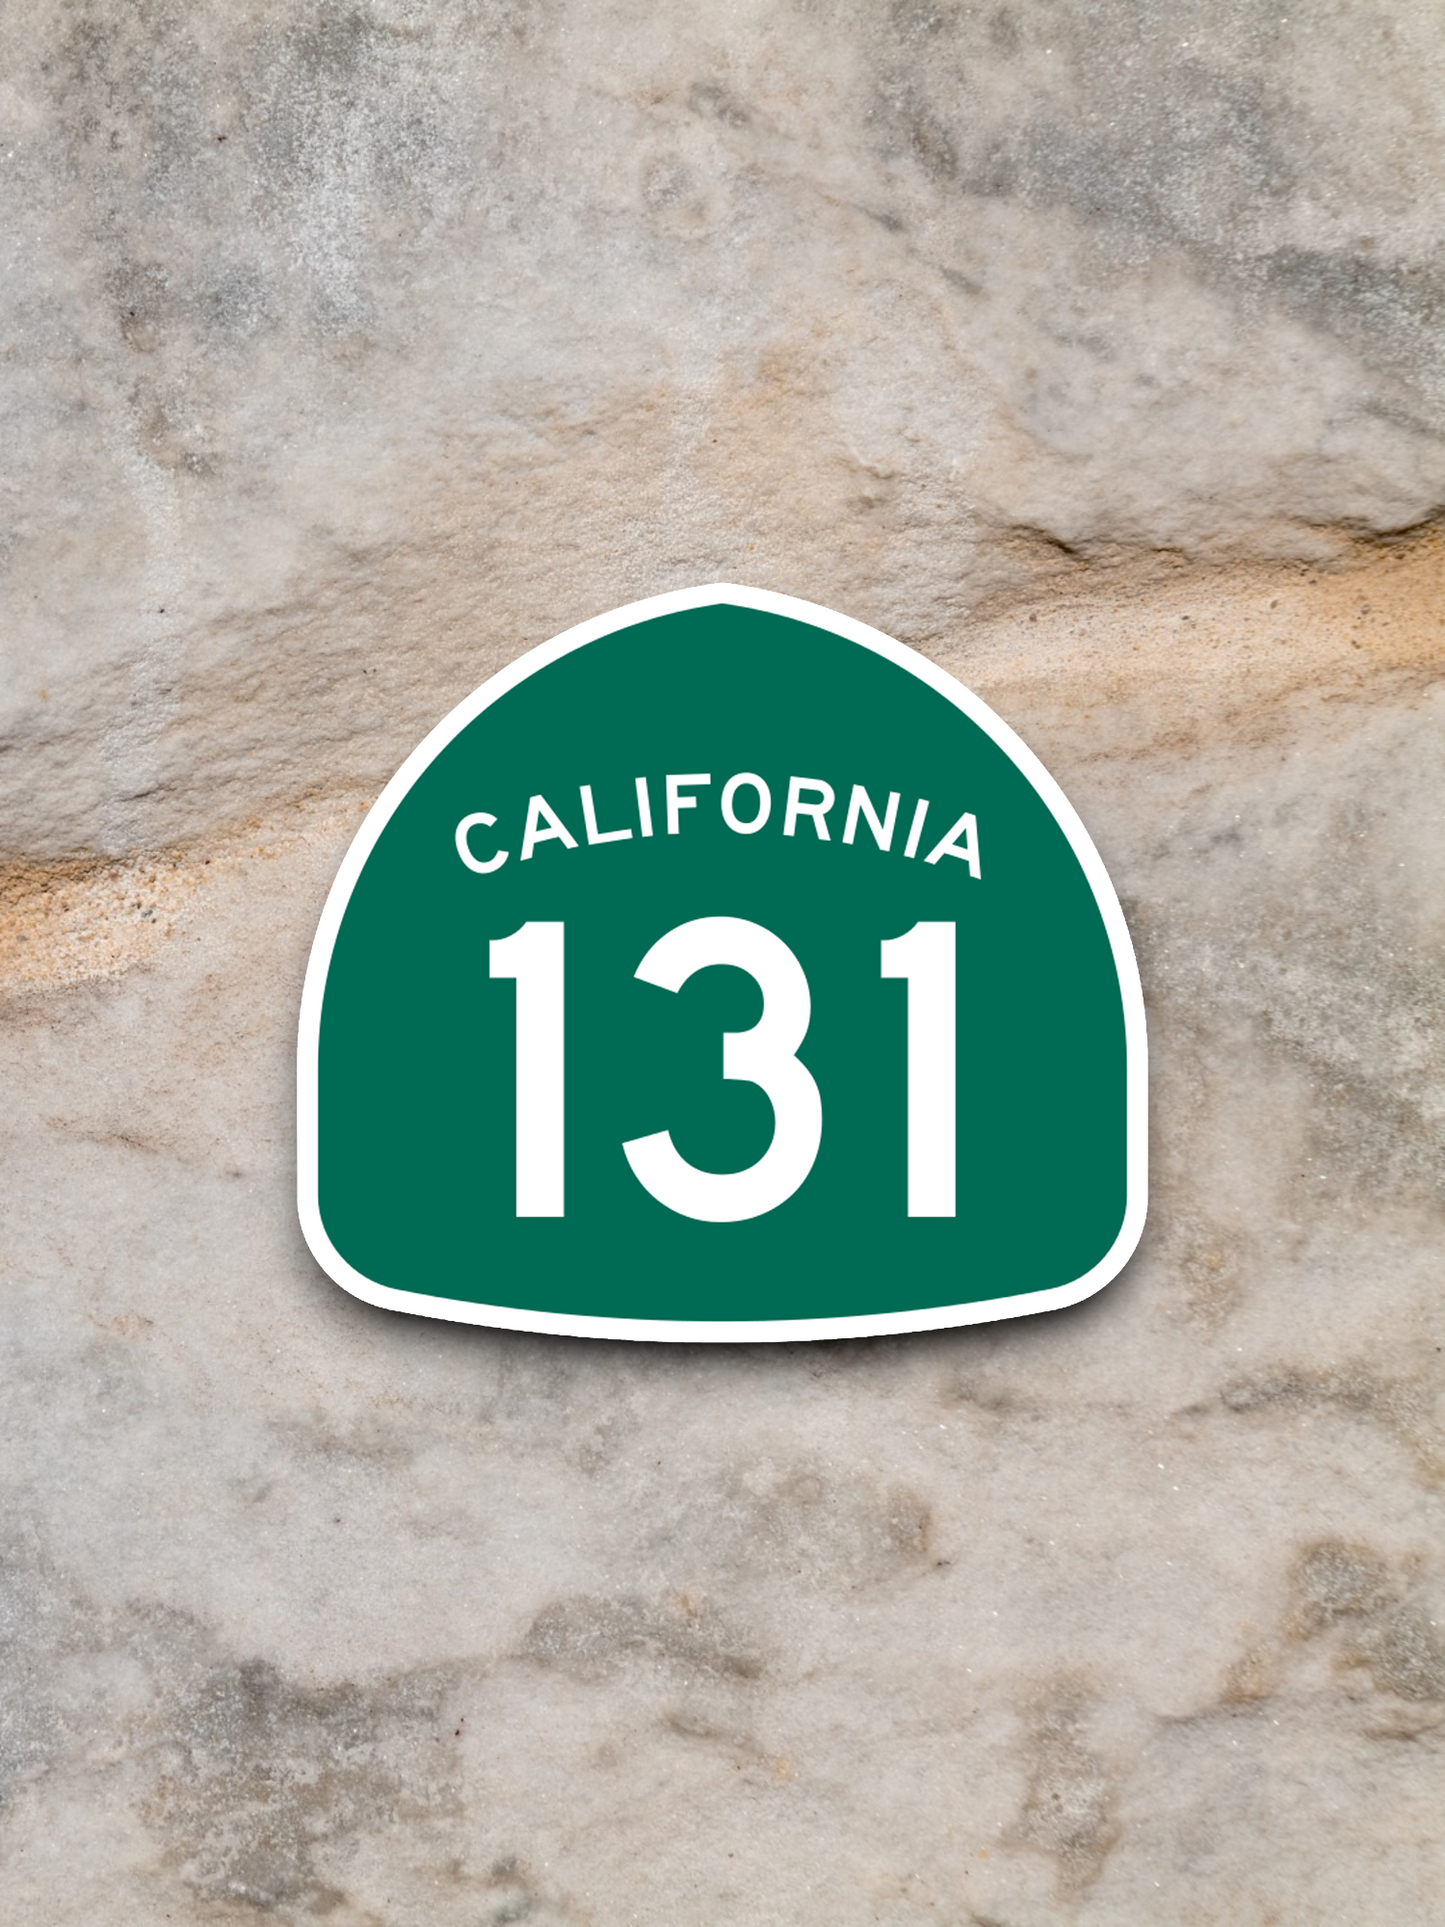 California State Route 131 Road Sign Sticker